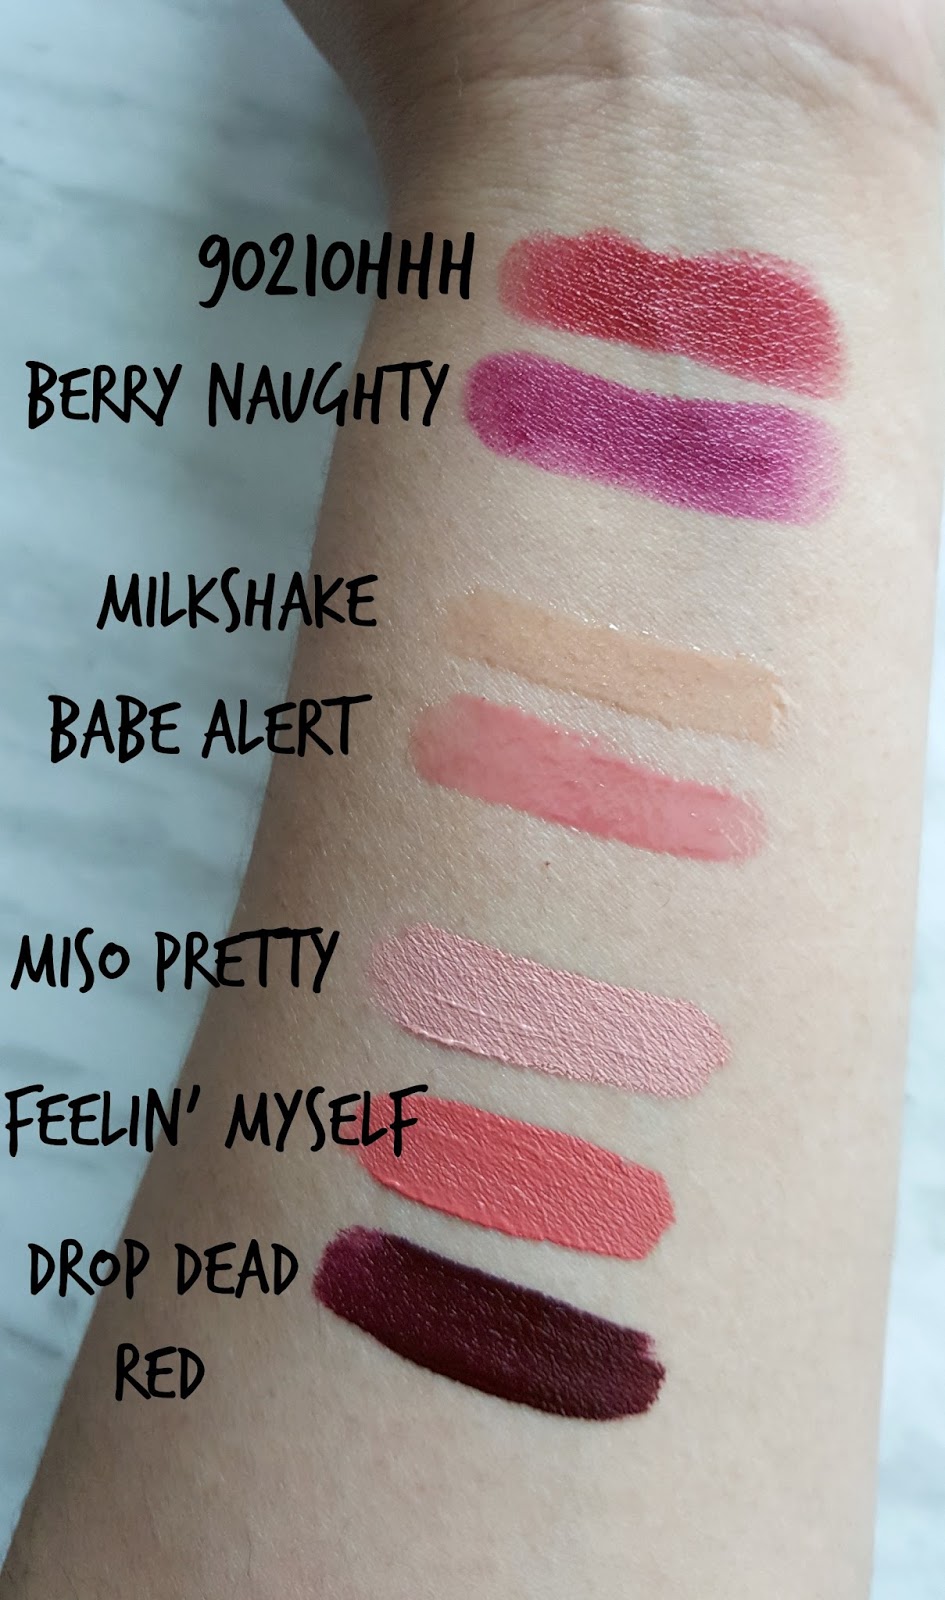 Too Faced La Creme Color Drenched Lip Cream in 90210hhh and Berry Naughty. 